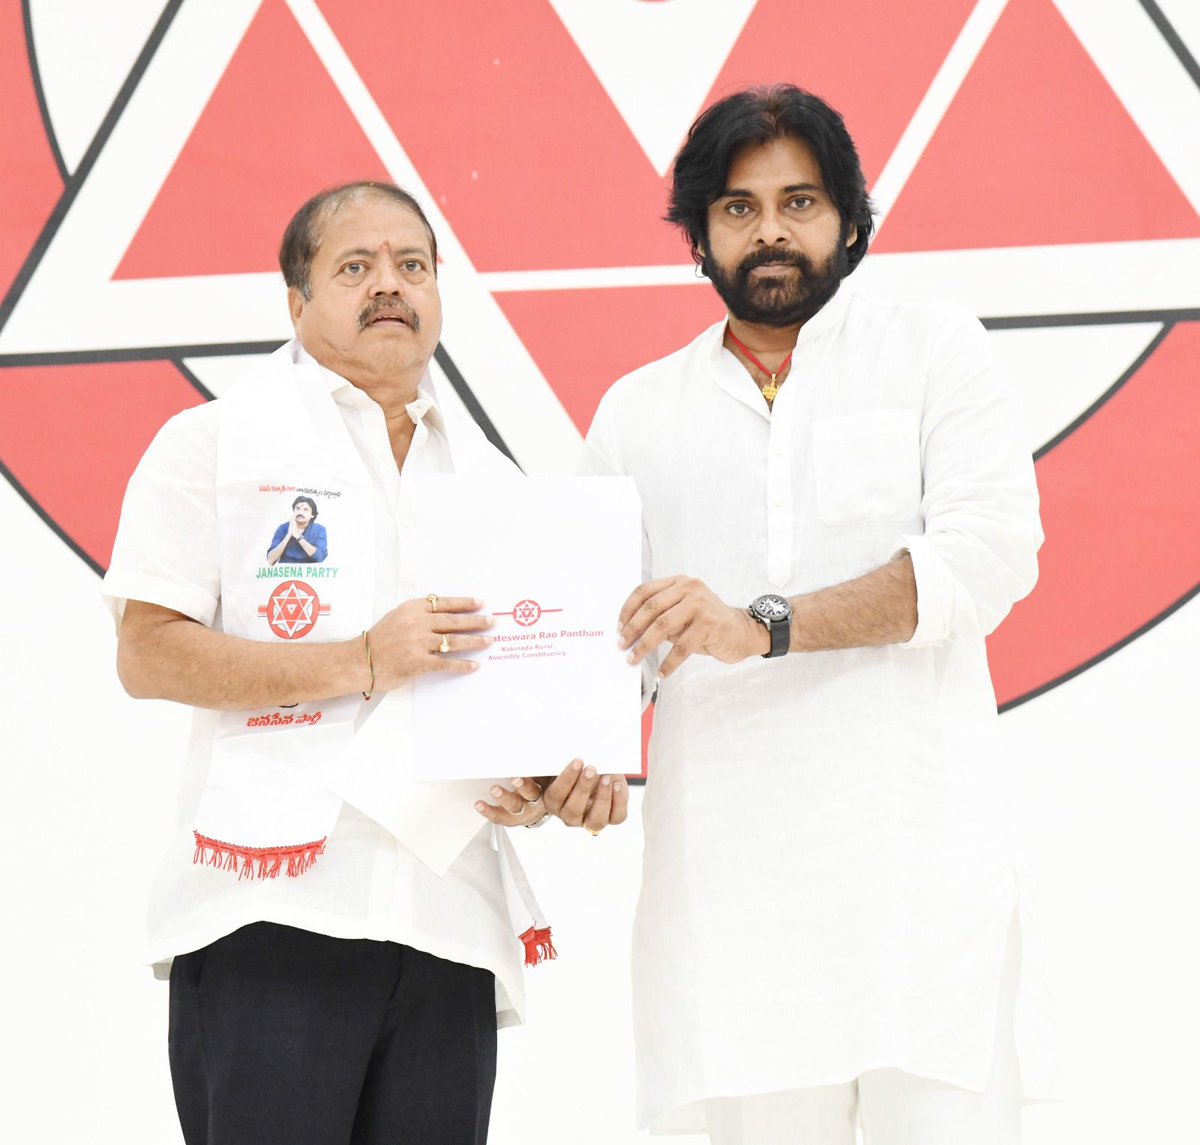 Sri @PawanKalyan Garu handed over B-Forms to the MLA and MP contestants of JanaSena Party in Mangalagiri #VoteForGlass